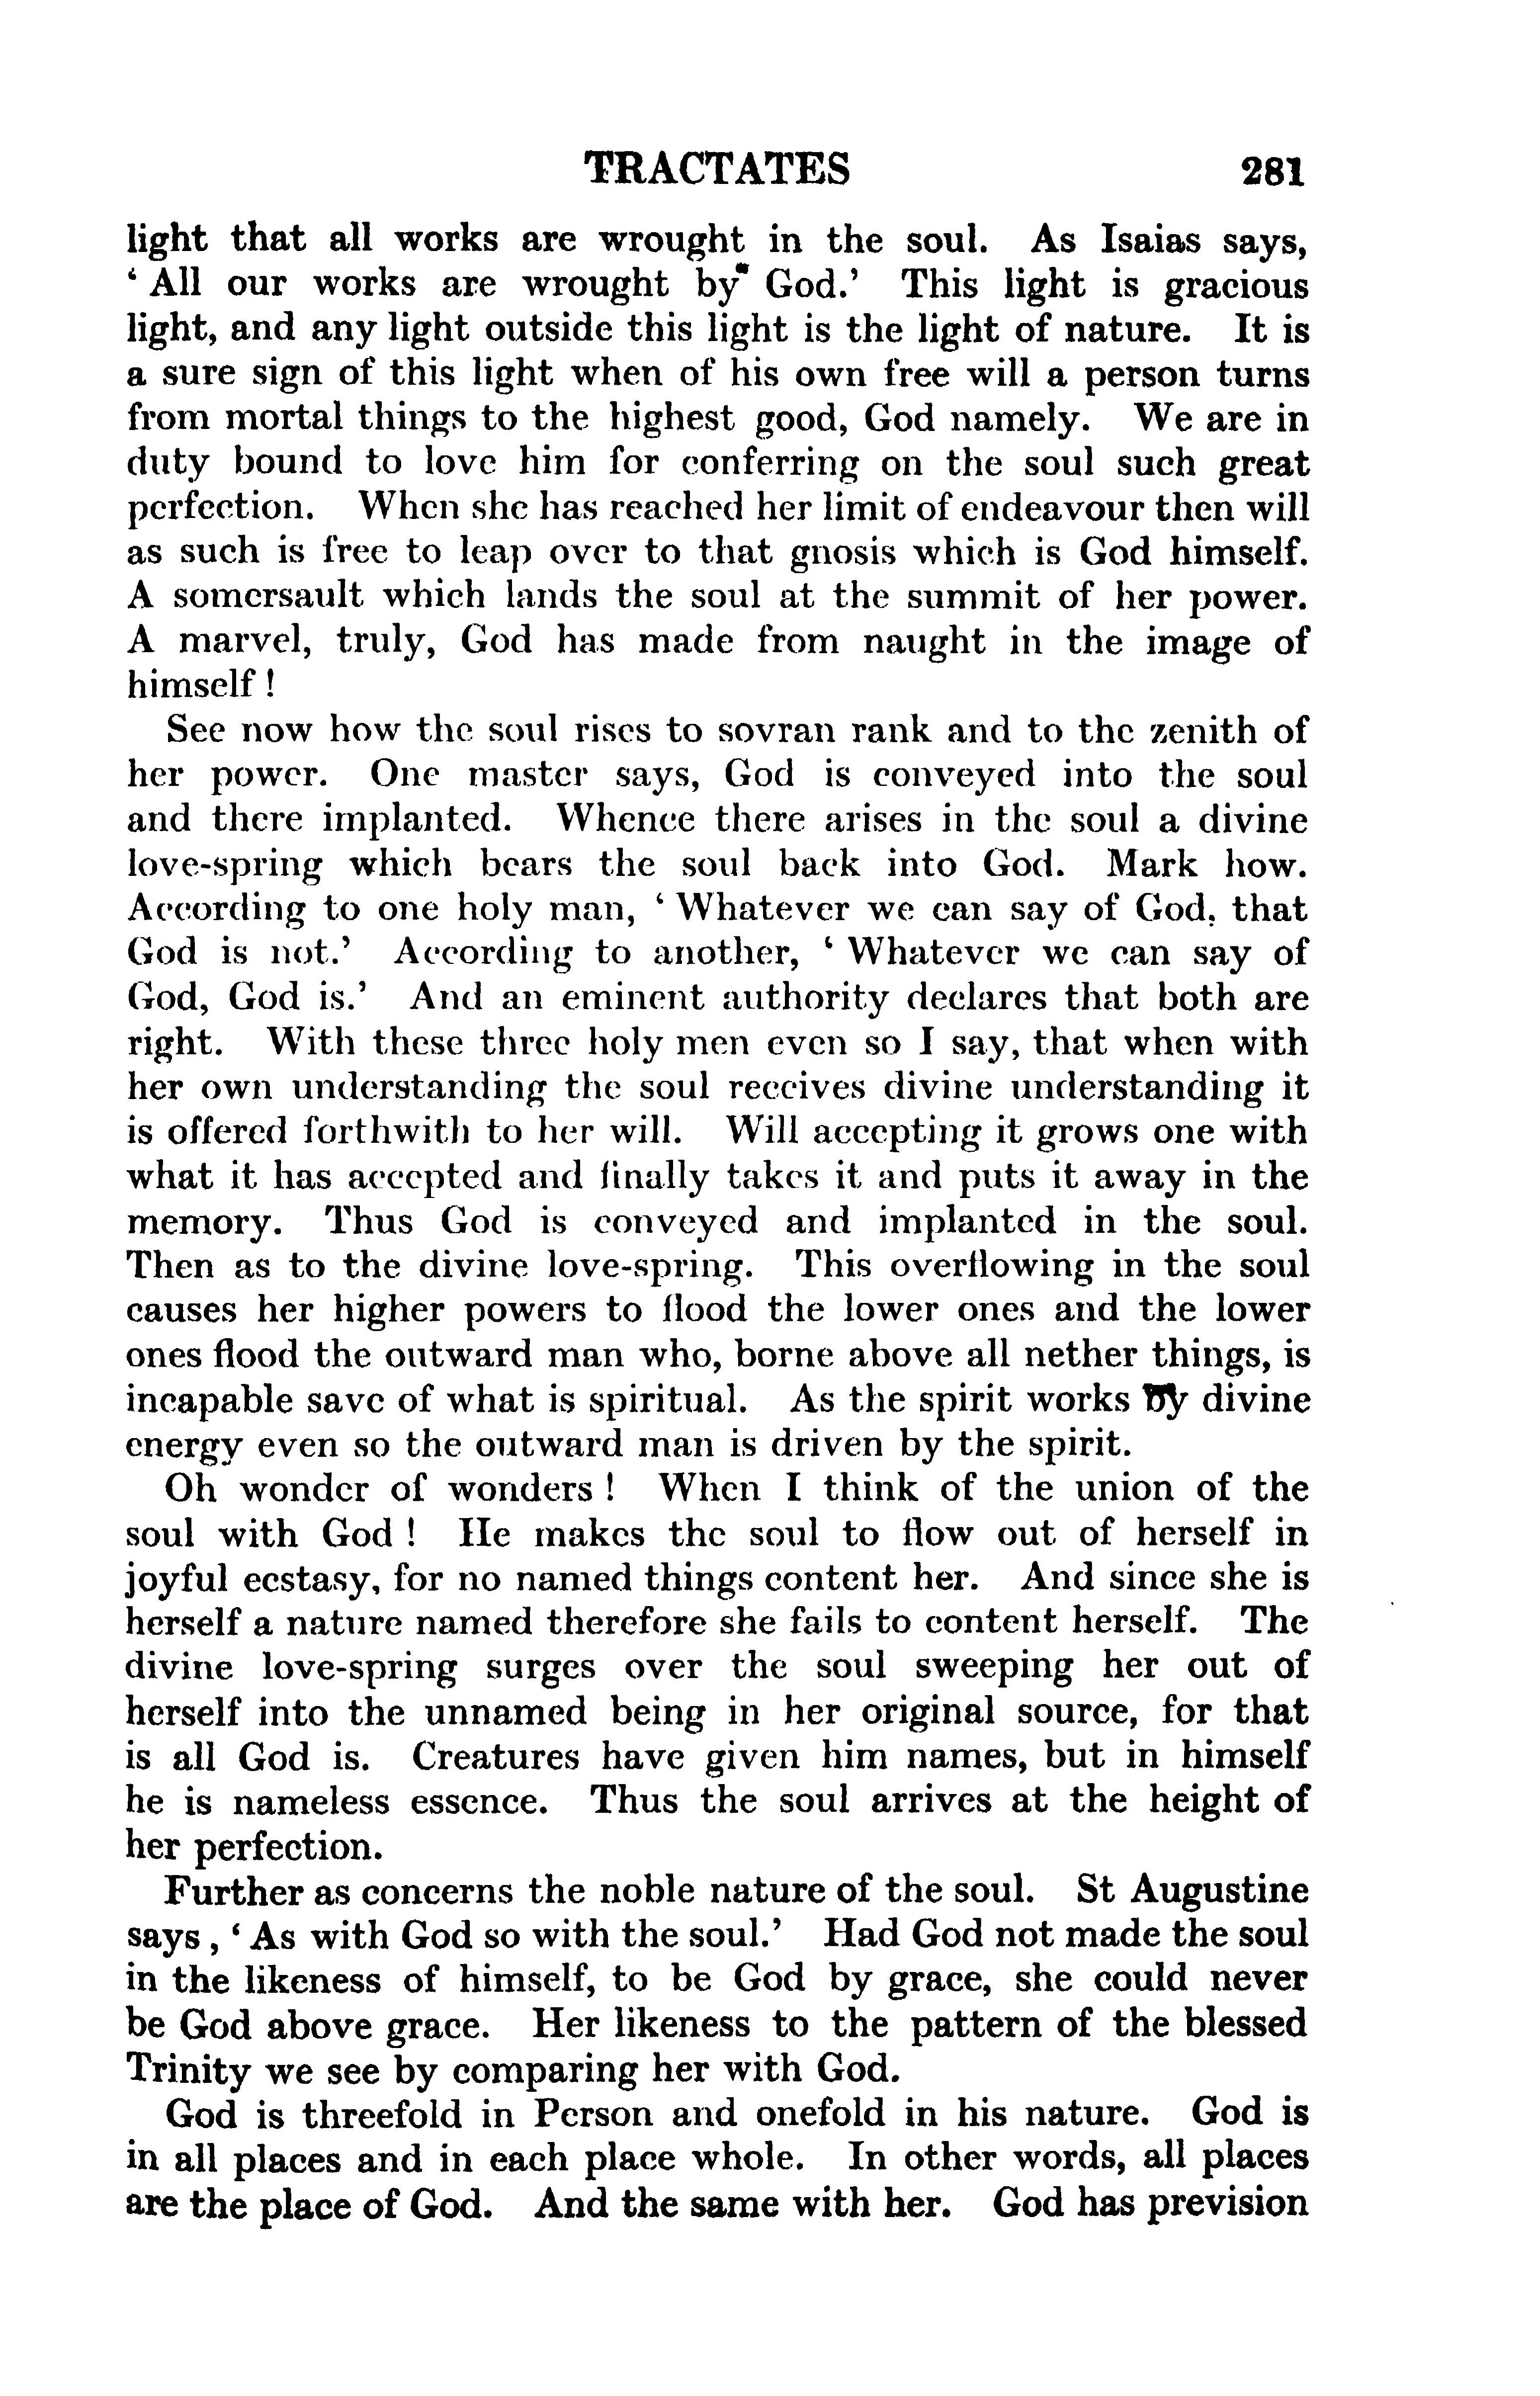 Image of page 0305